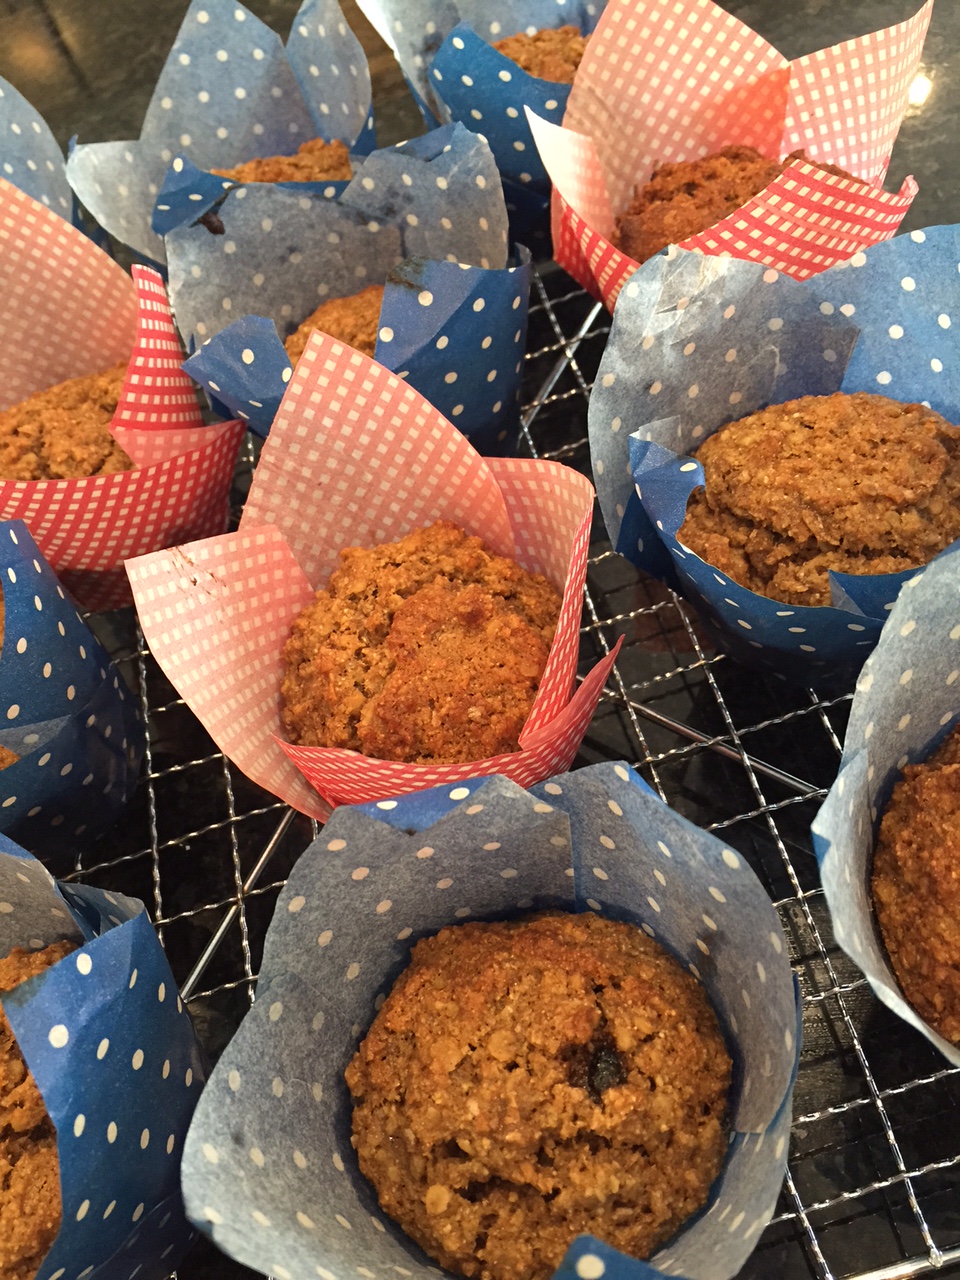 banana muffins, dairy free, muffins, bananas, cozebakes, healthy bakes, oats, baking with bananas, recipe for muffins